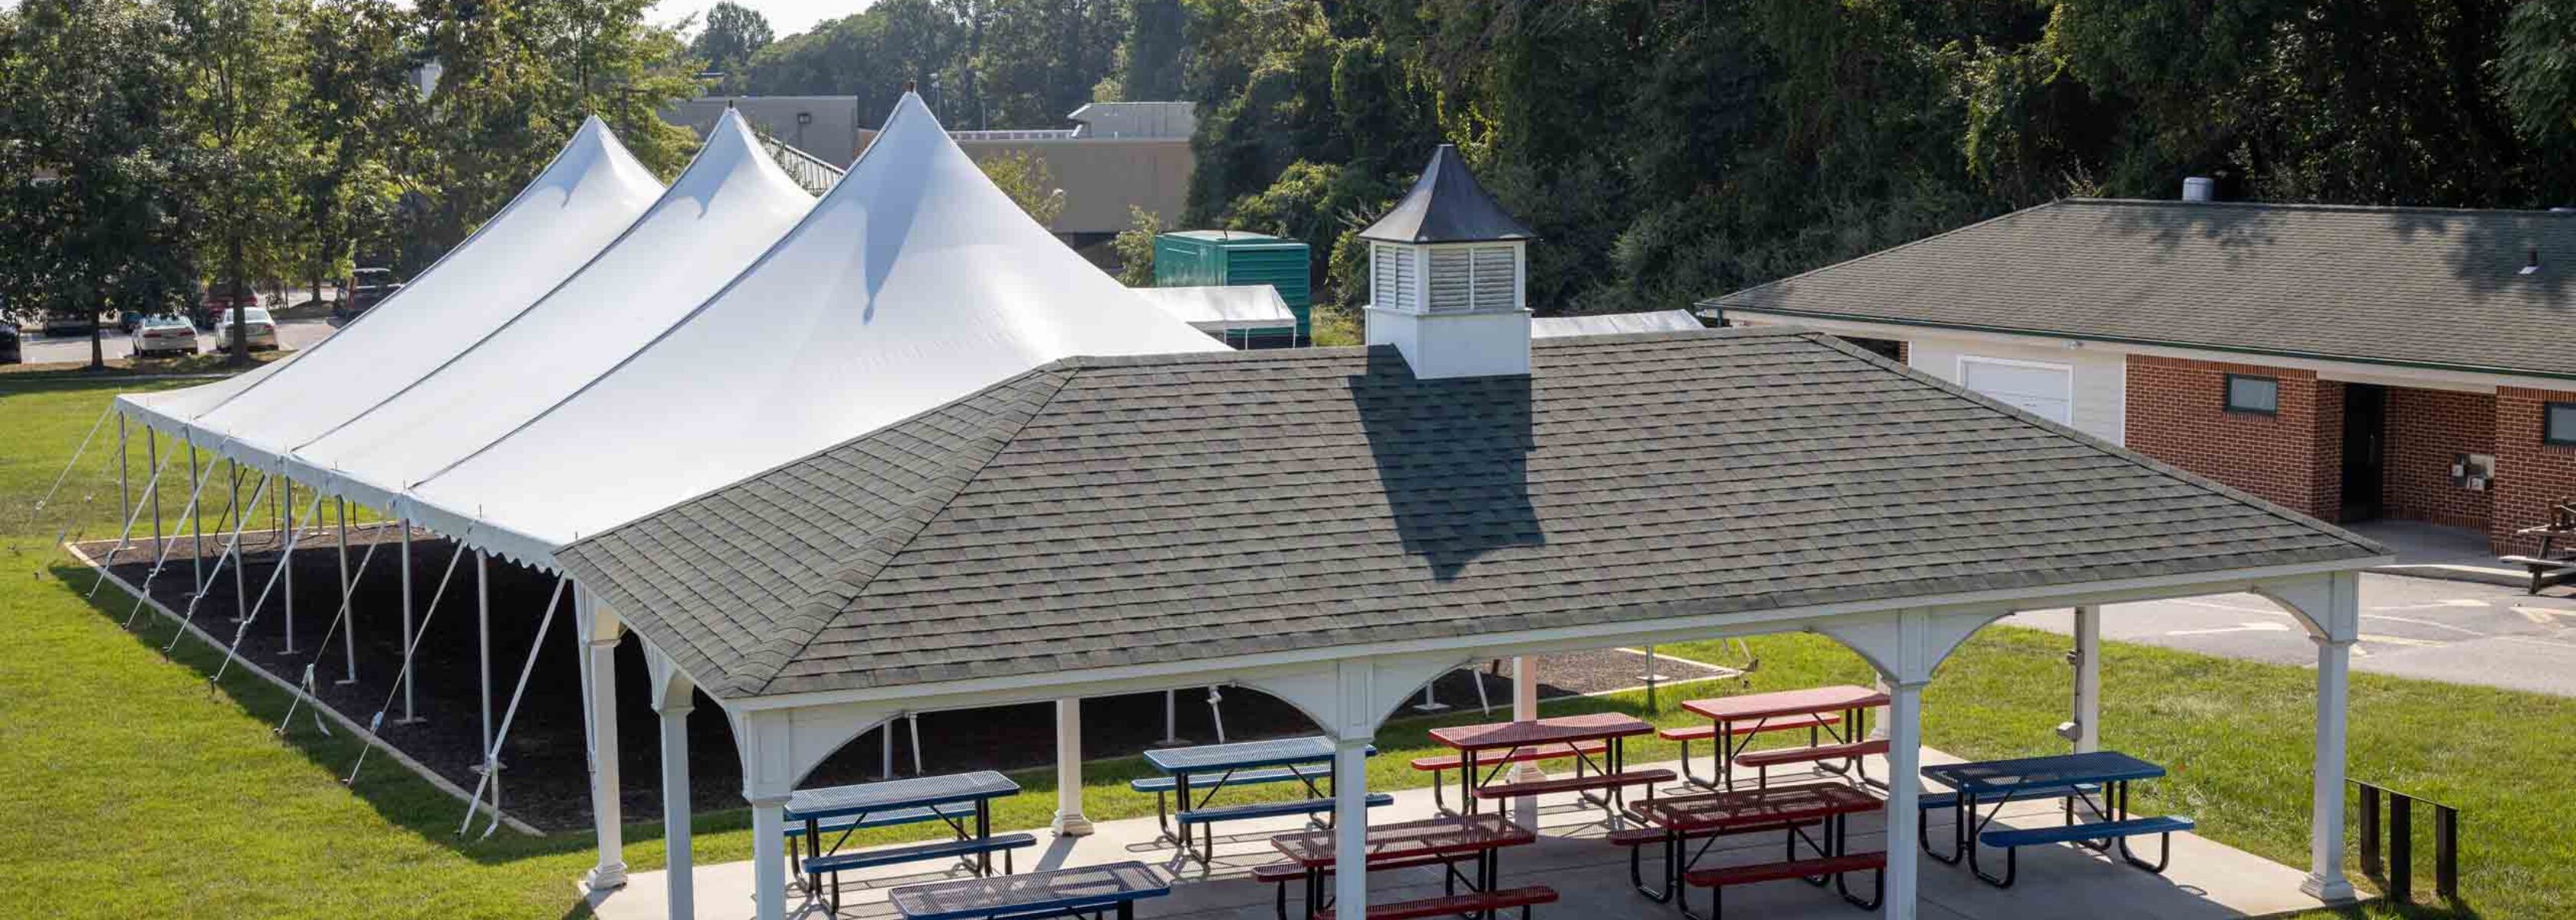 An outdoor tent facility.